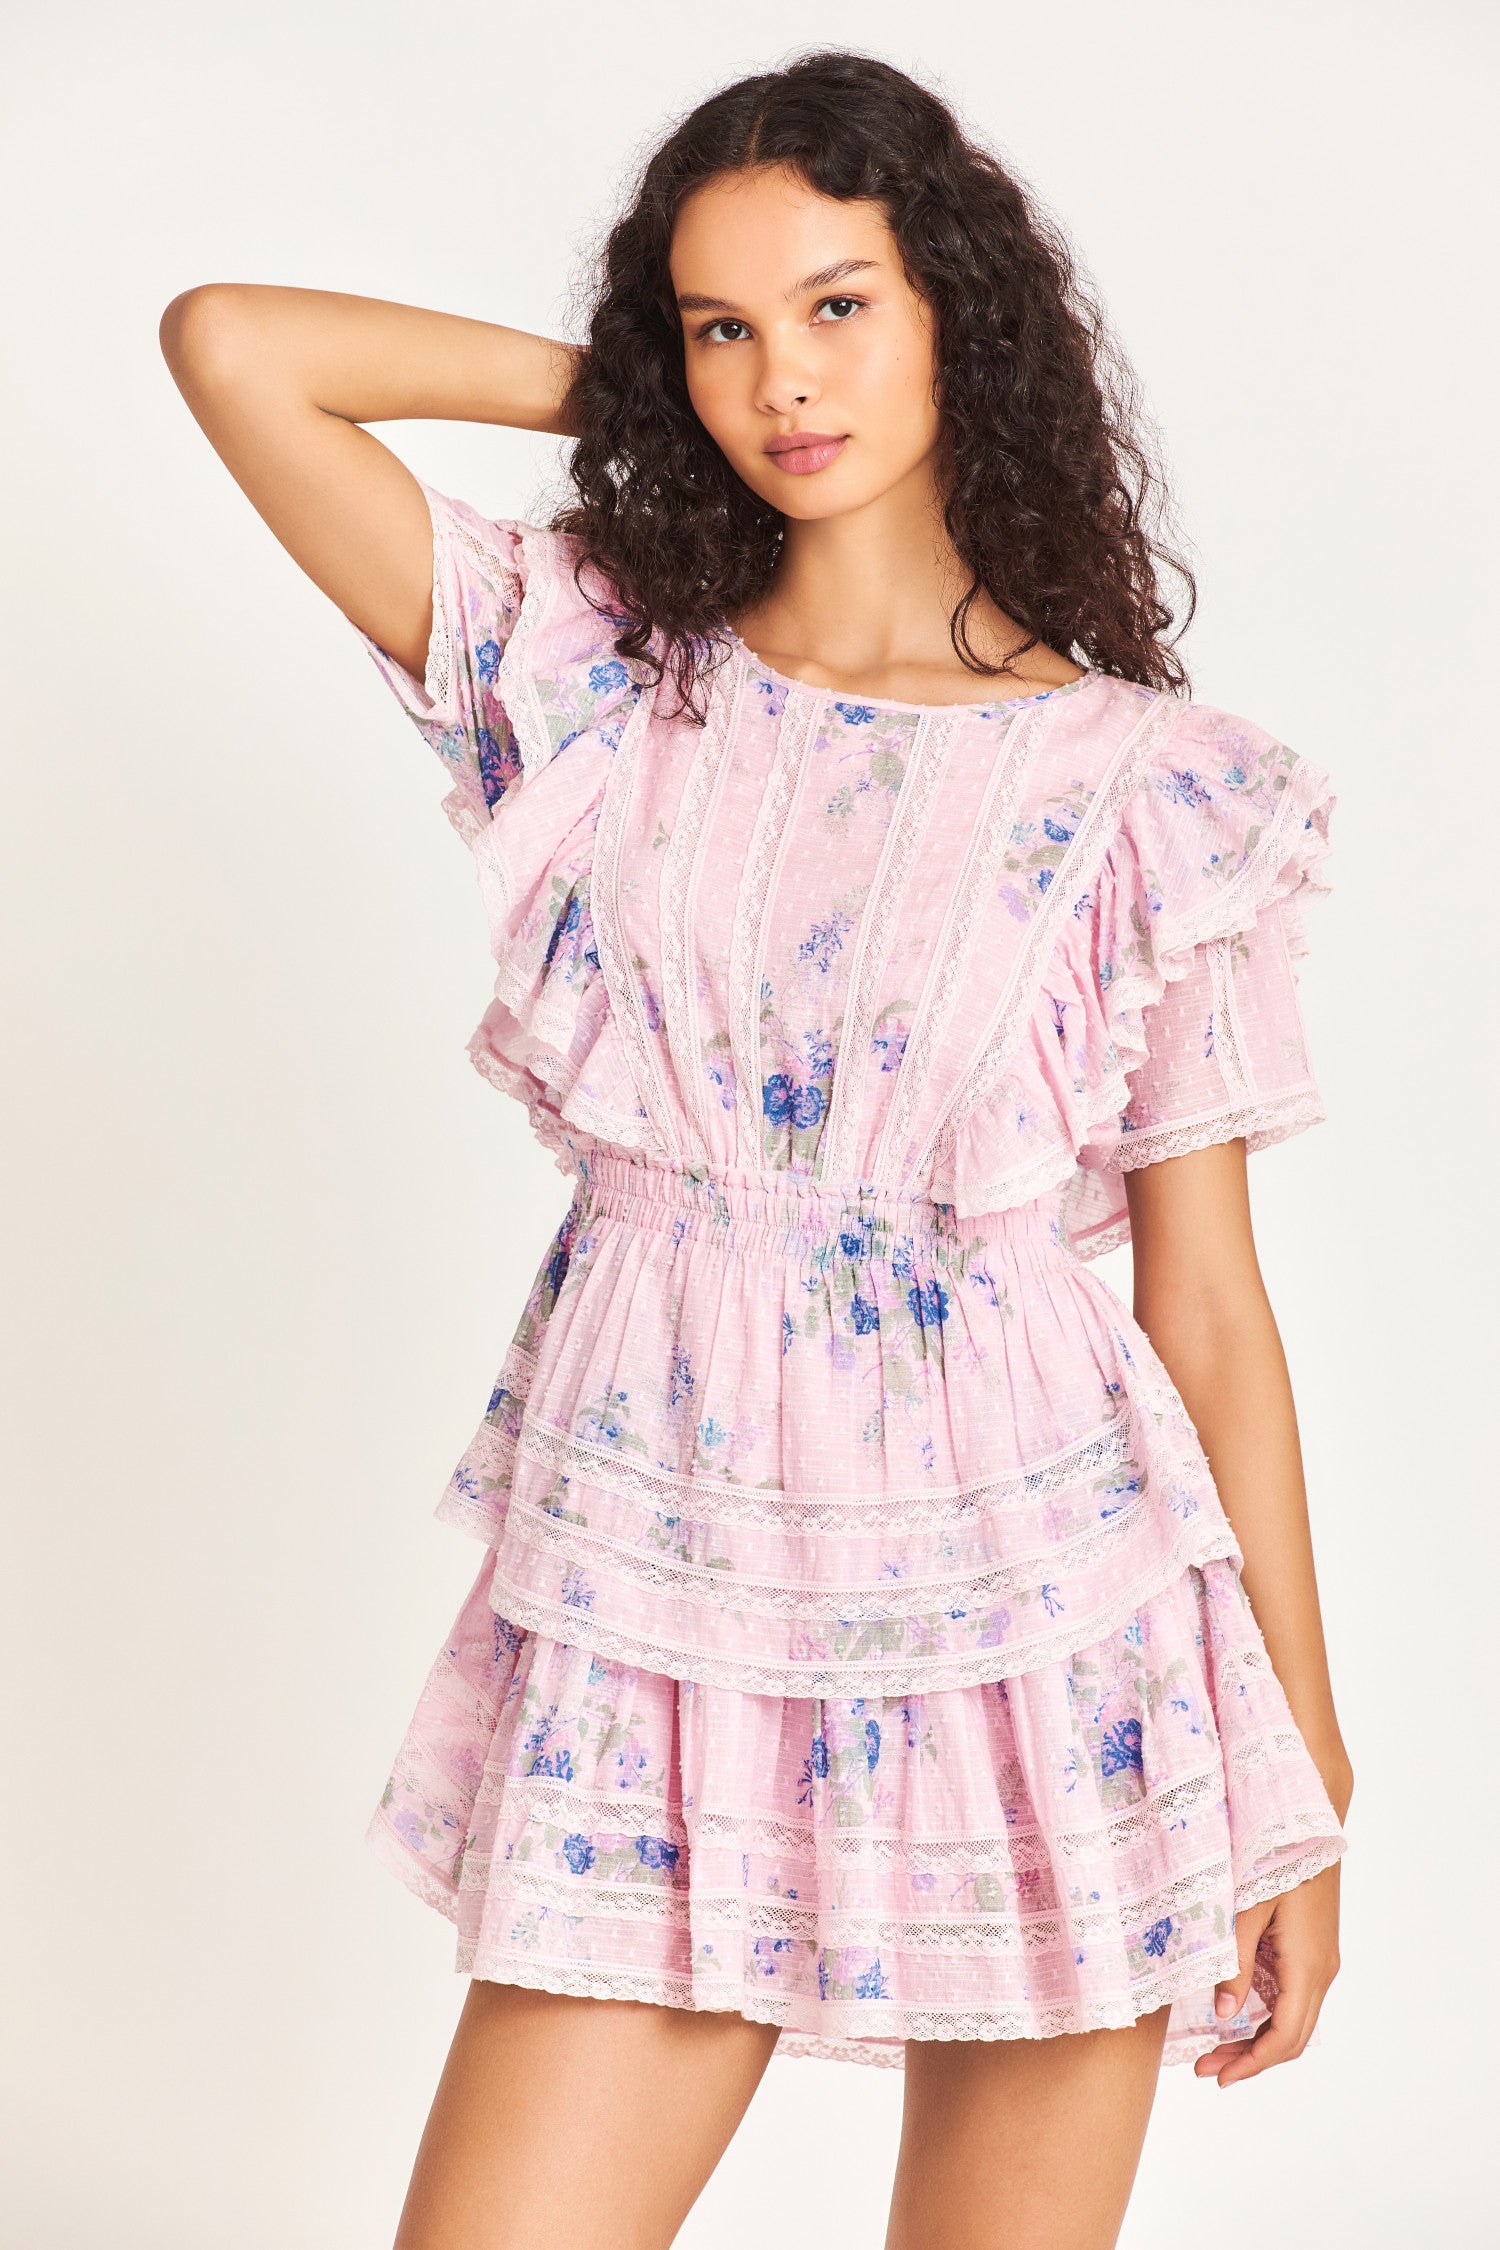 The Natasha dress in pink features double ruffled flutter sleeves, an elasticated waist, and custom lace panels at the trim of the skirt. The dress also features small blue flower prints throughout the dress. 